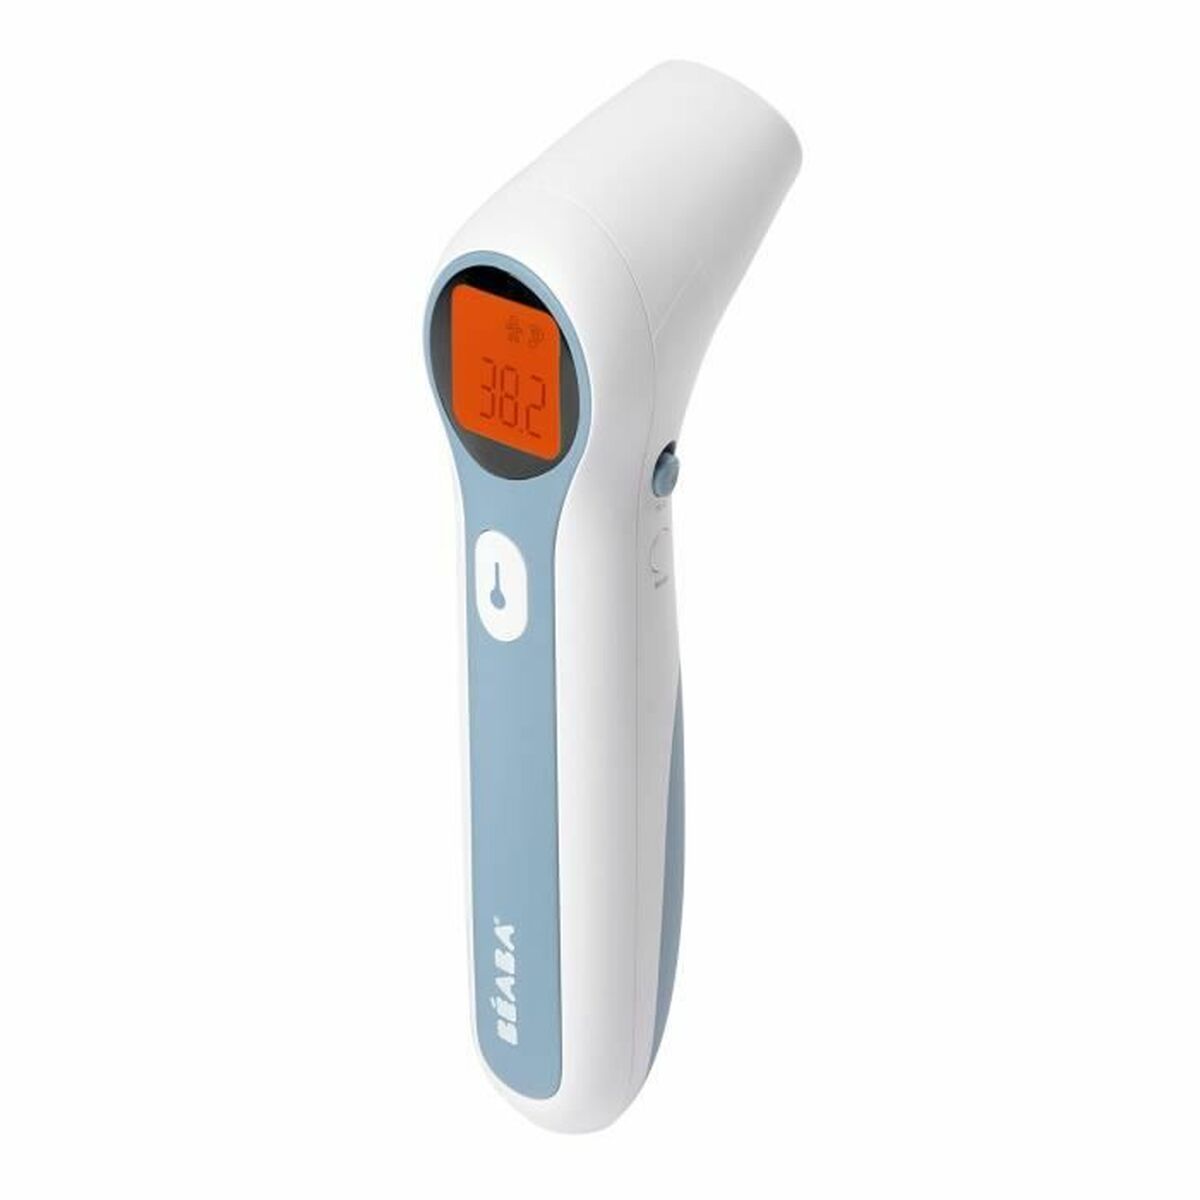 Infrared Thermometer Béaba Thermospeed